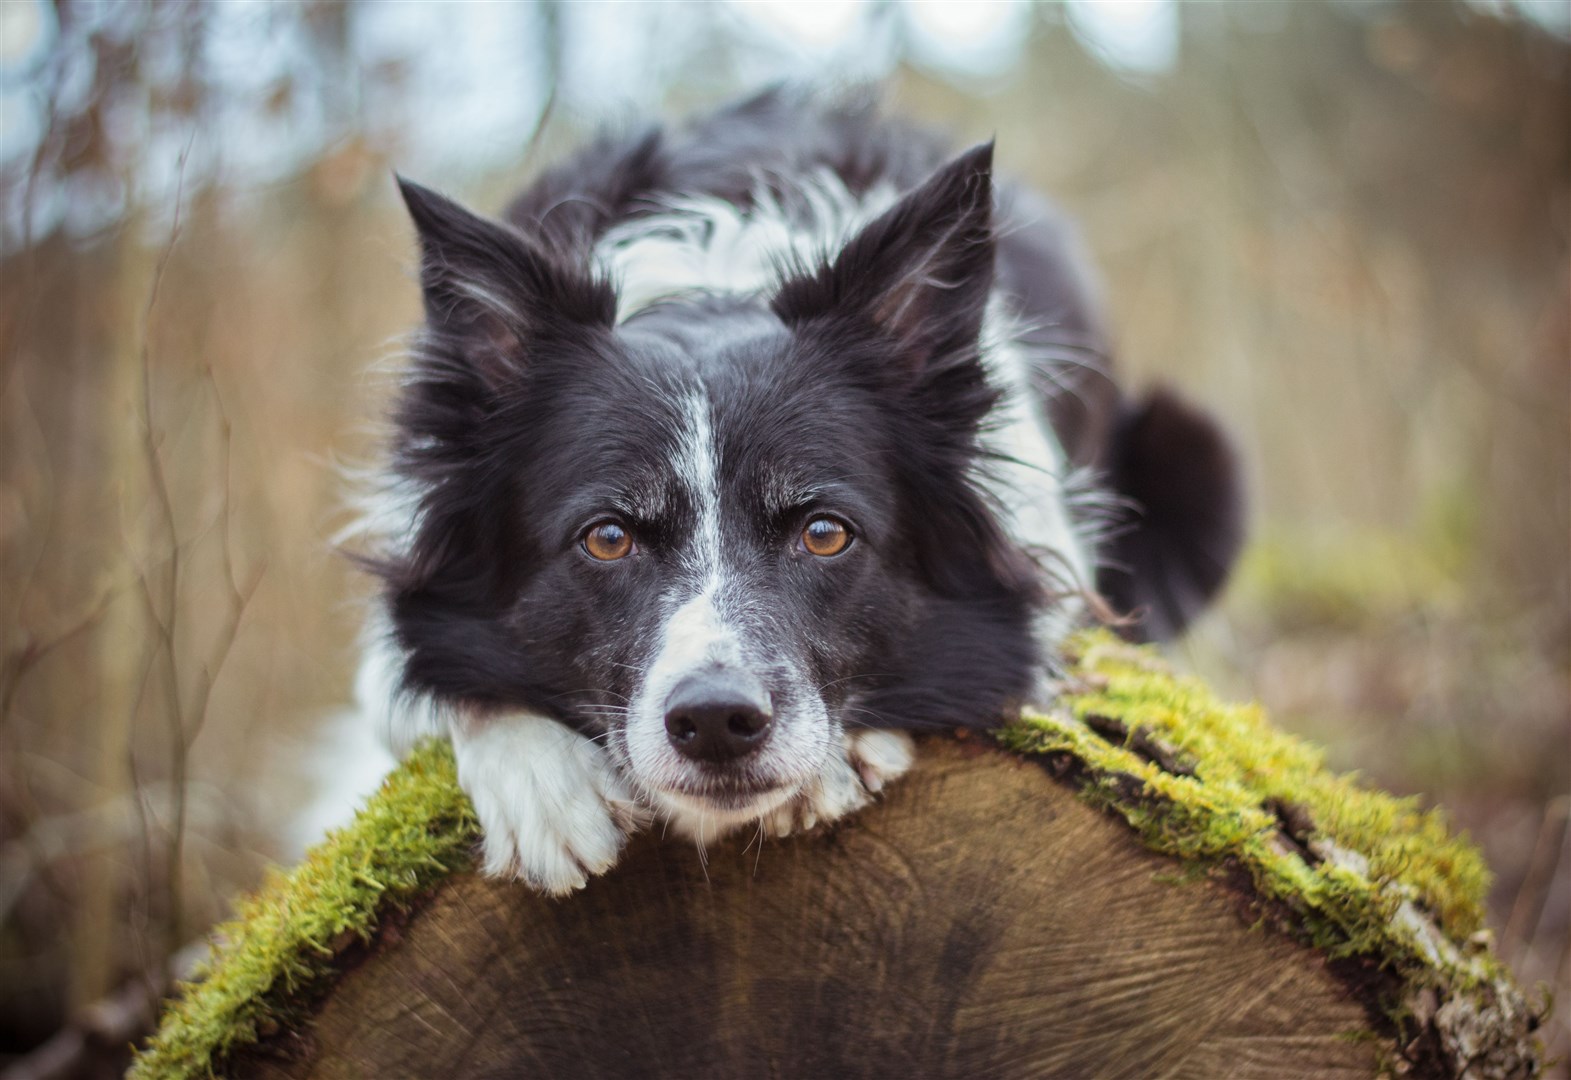 Faithful friends like this collie can boost health.